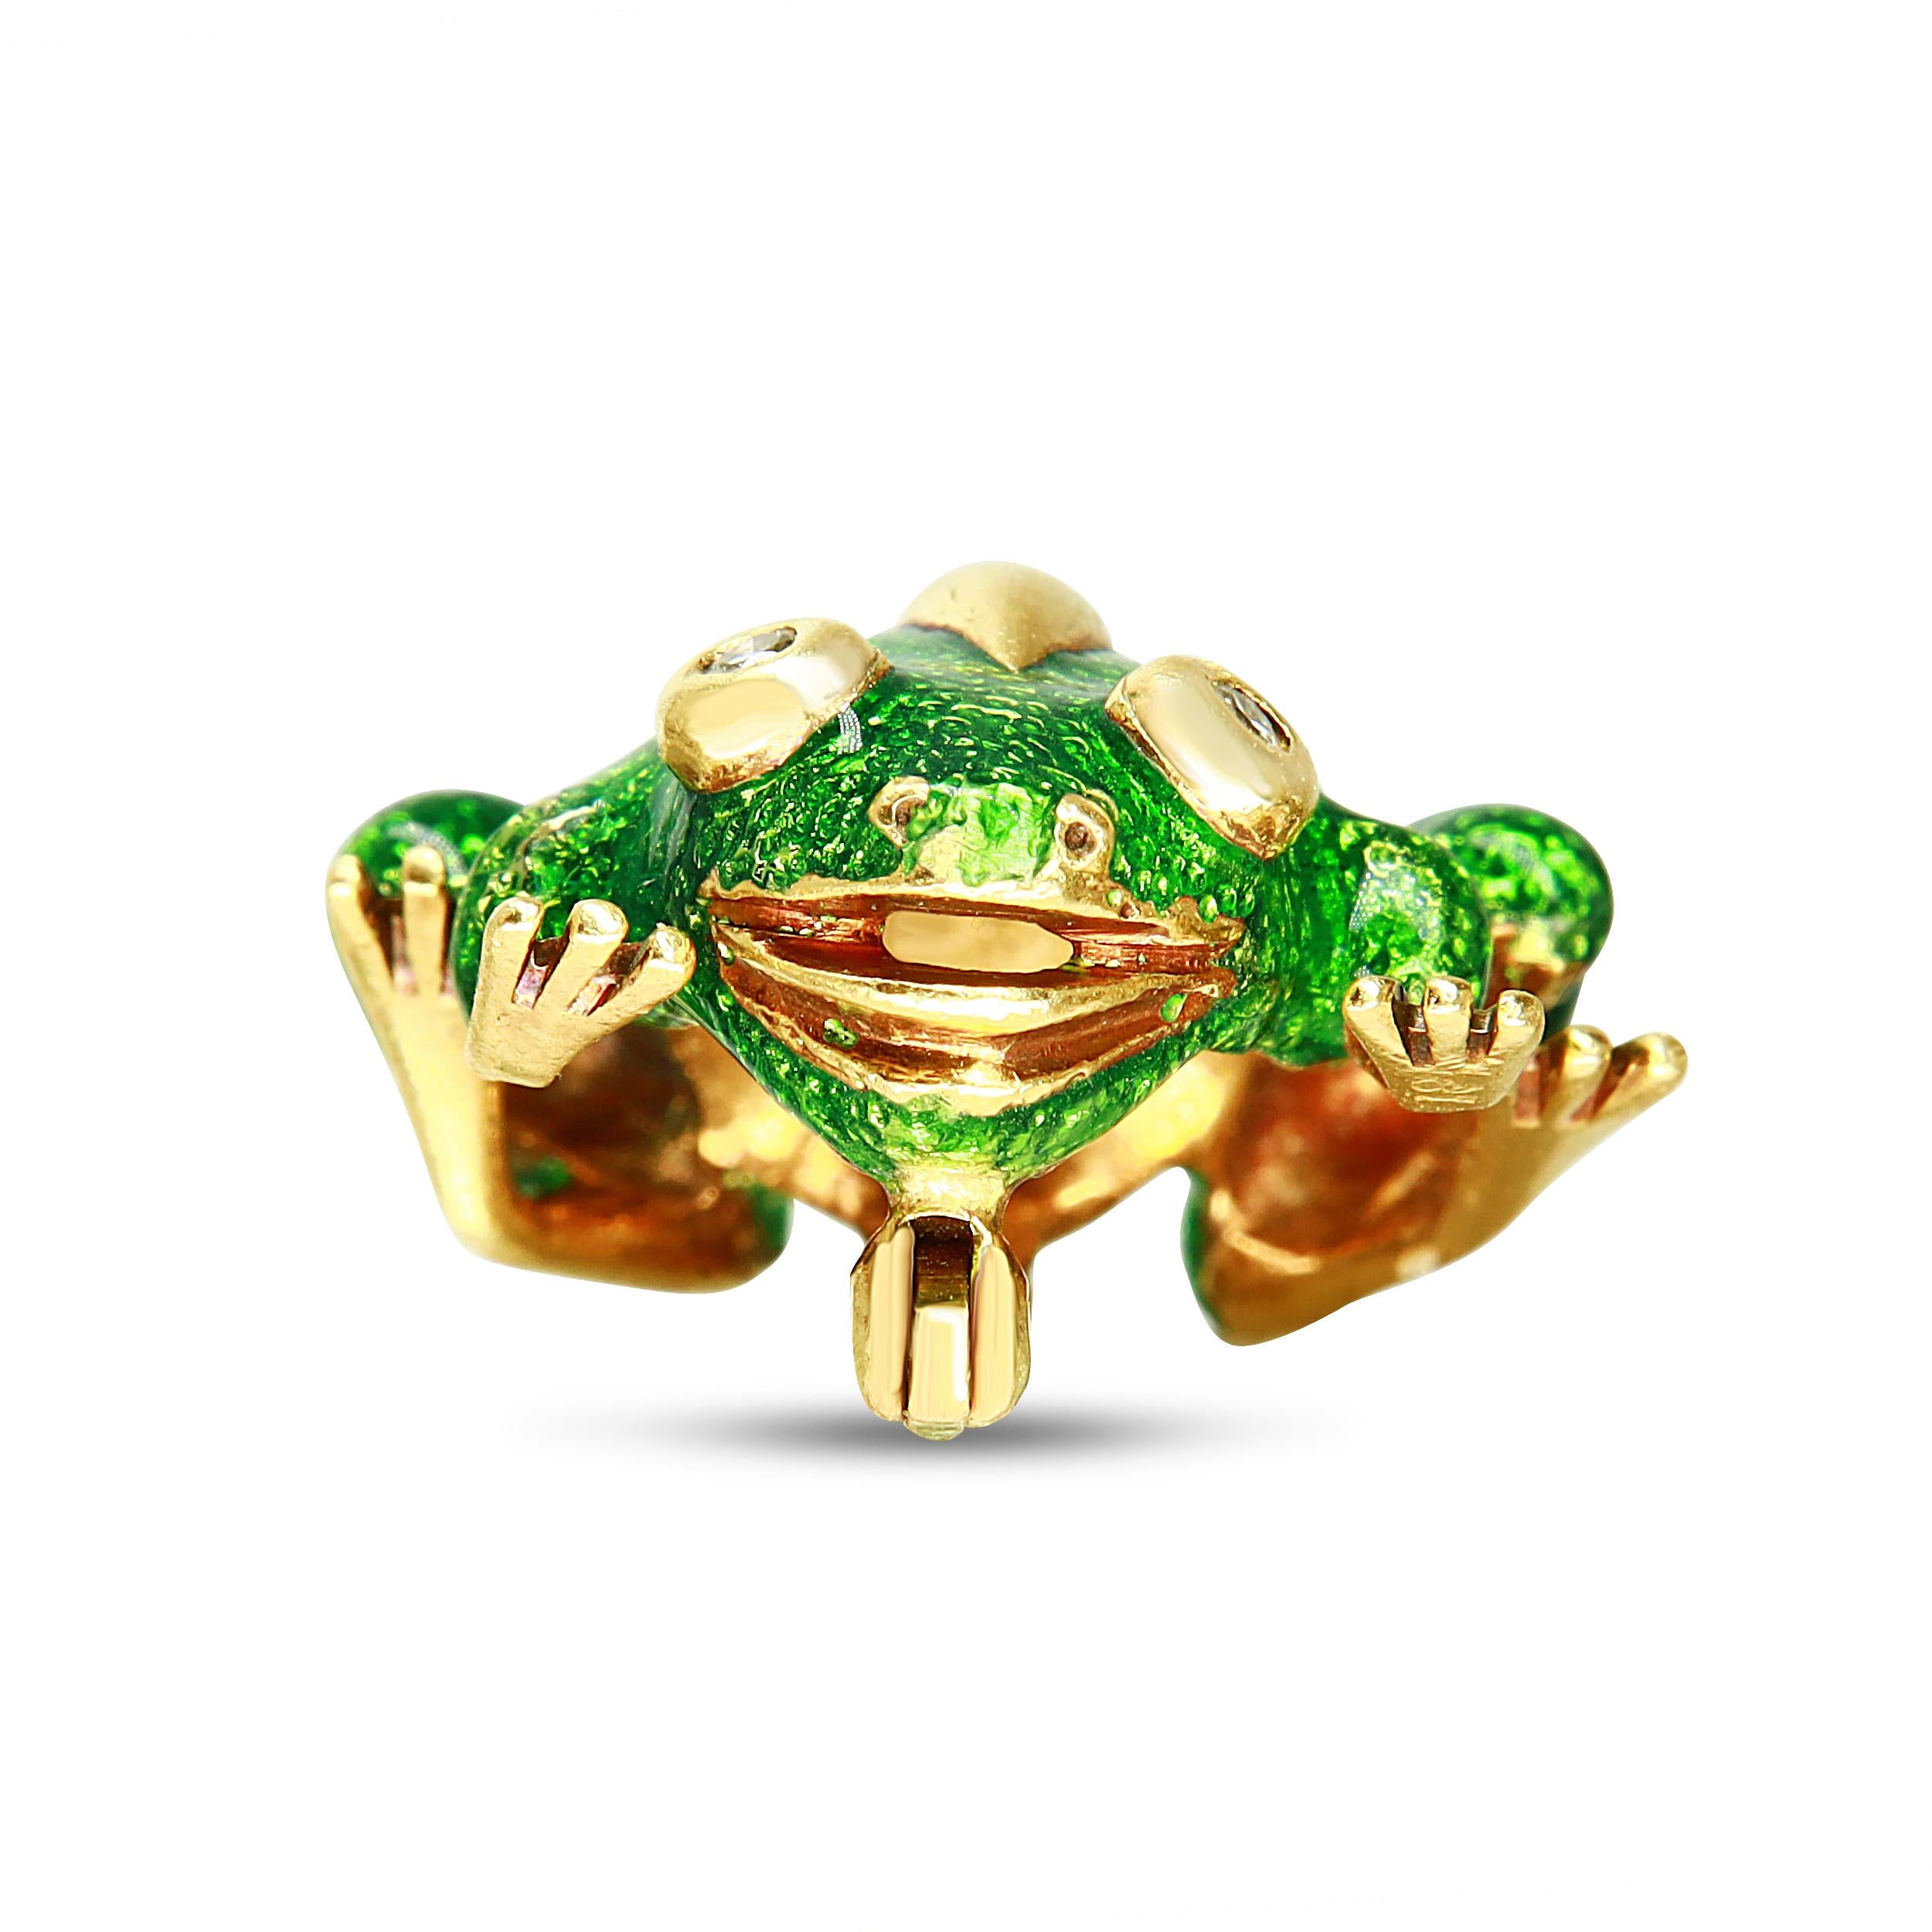 Leap into a fresh, new style with the whimsy and charm of this delightful Green Enamel Frog Brooch Pin. This little frog is ready to hop into a new adventure with eyes of cool white diamonds. These two round diamonds are bezel-set and provoke a